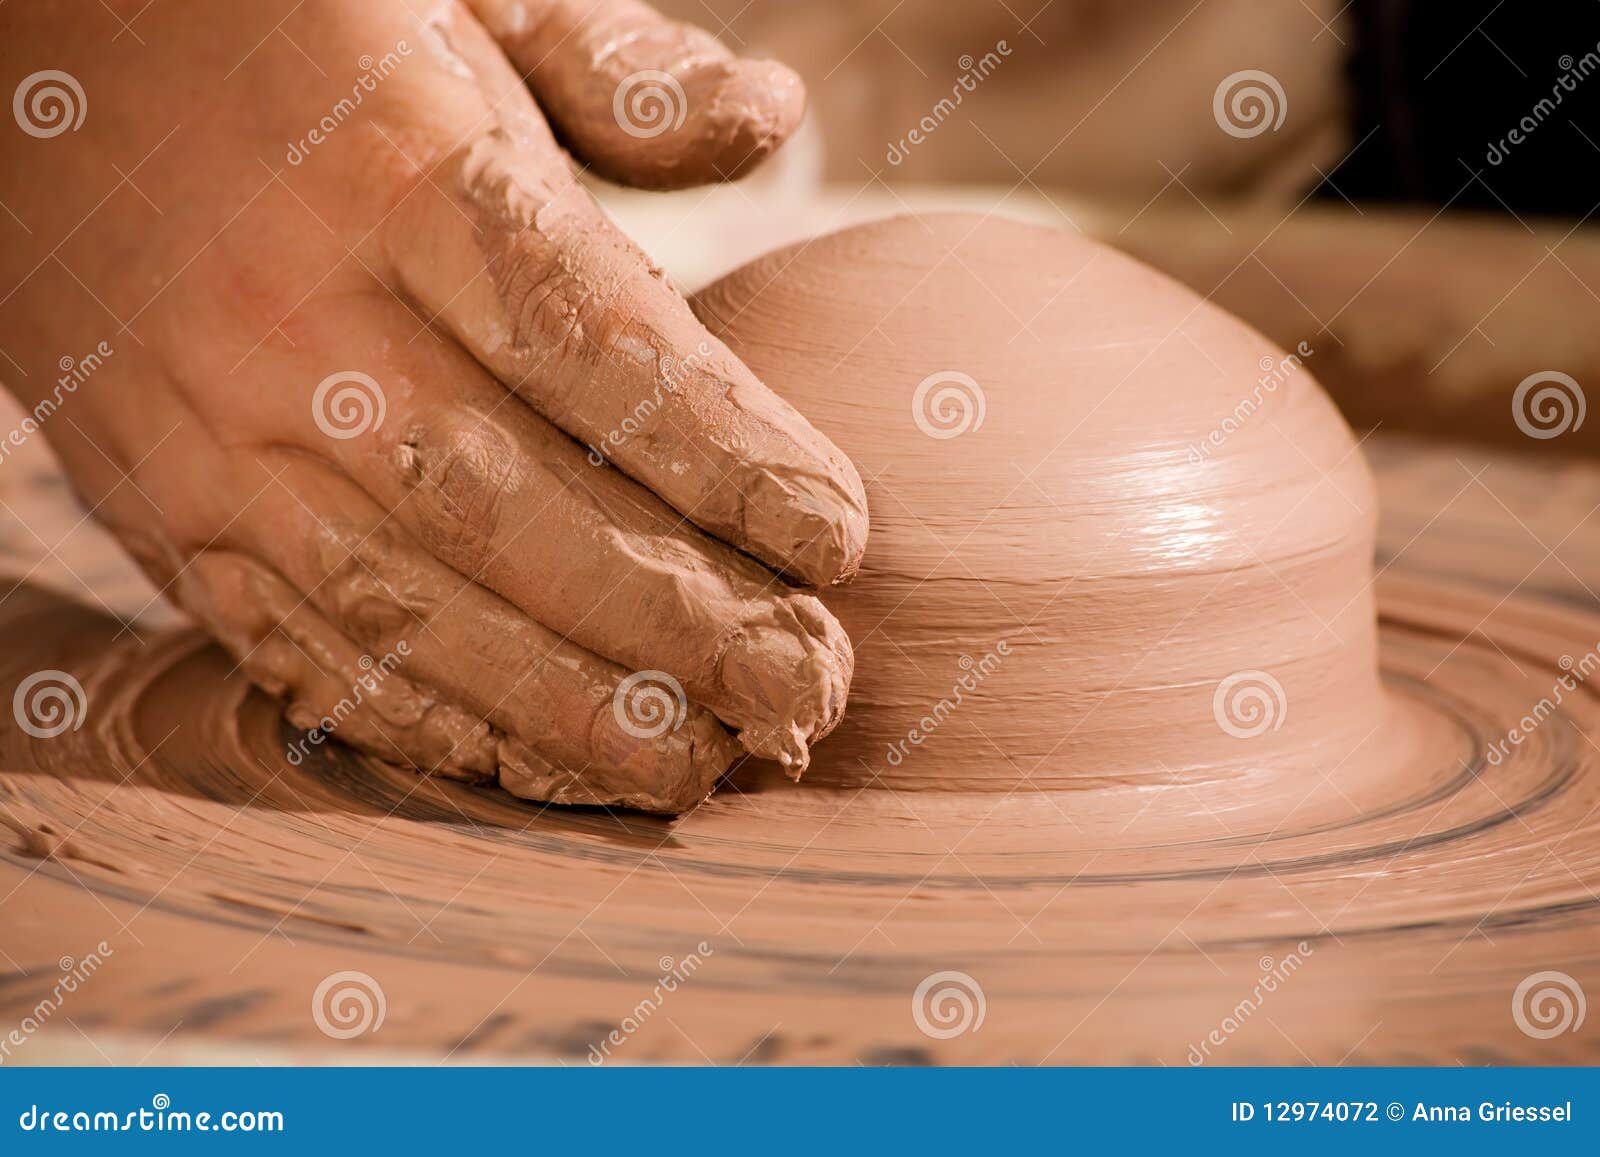 hand shaping wedge of clay